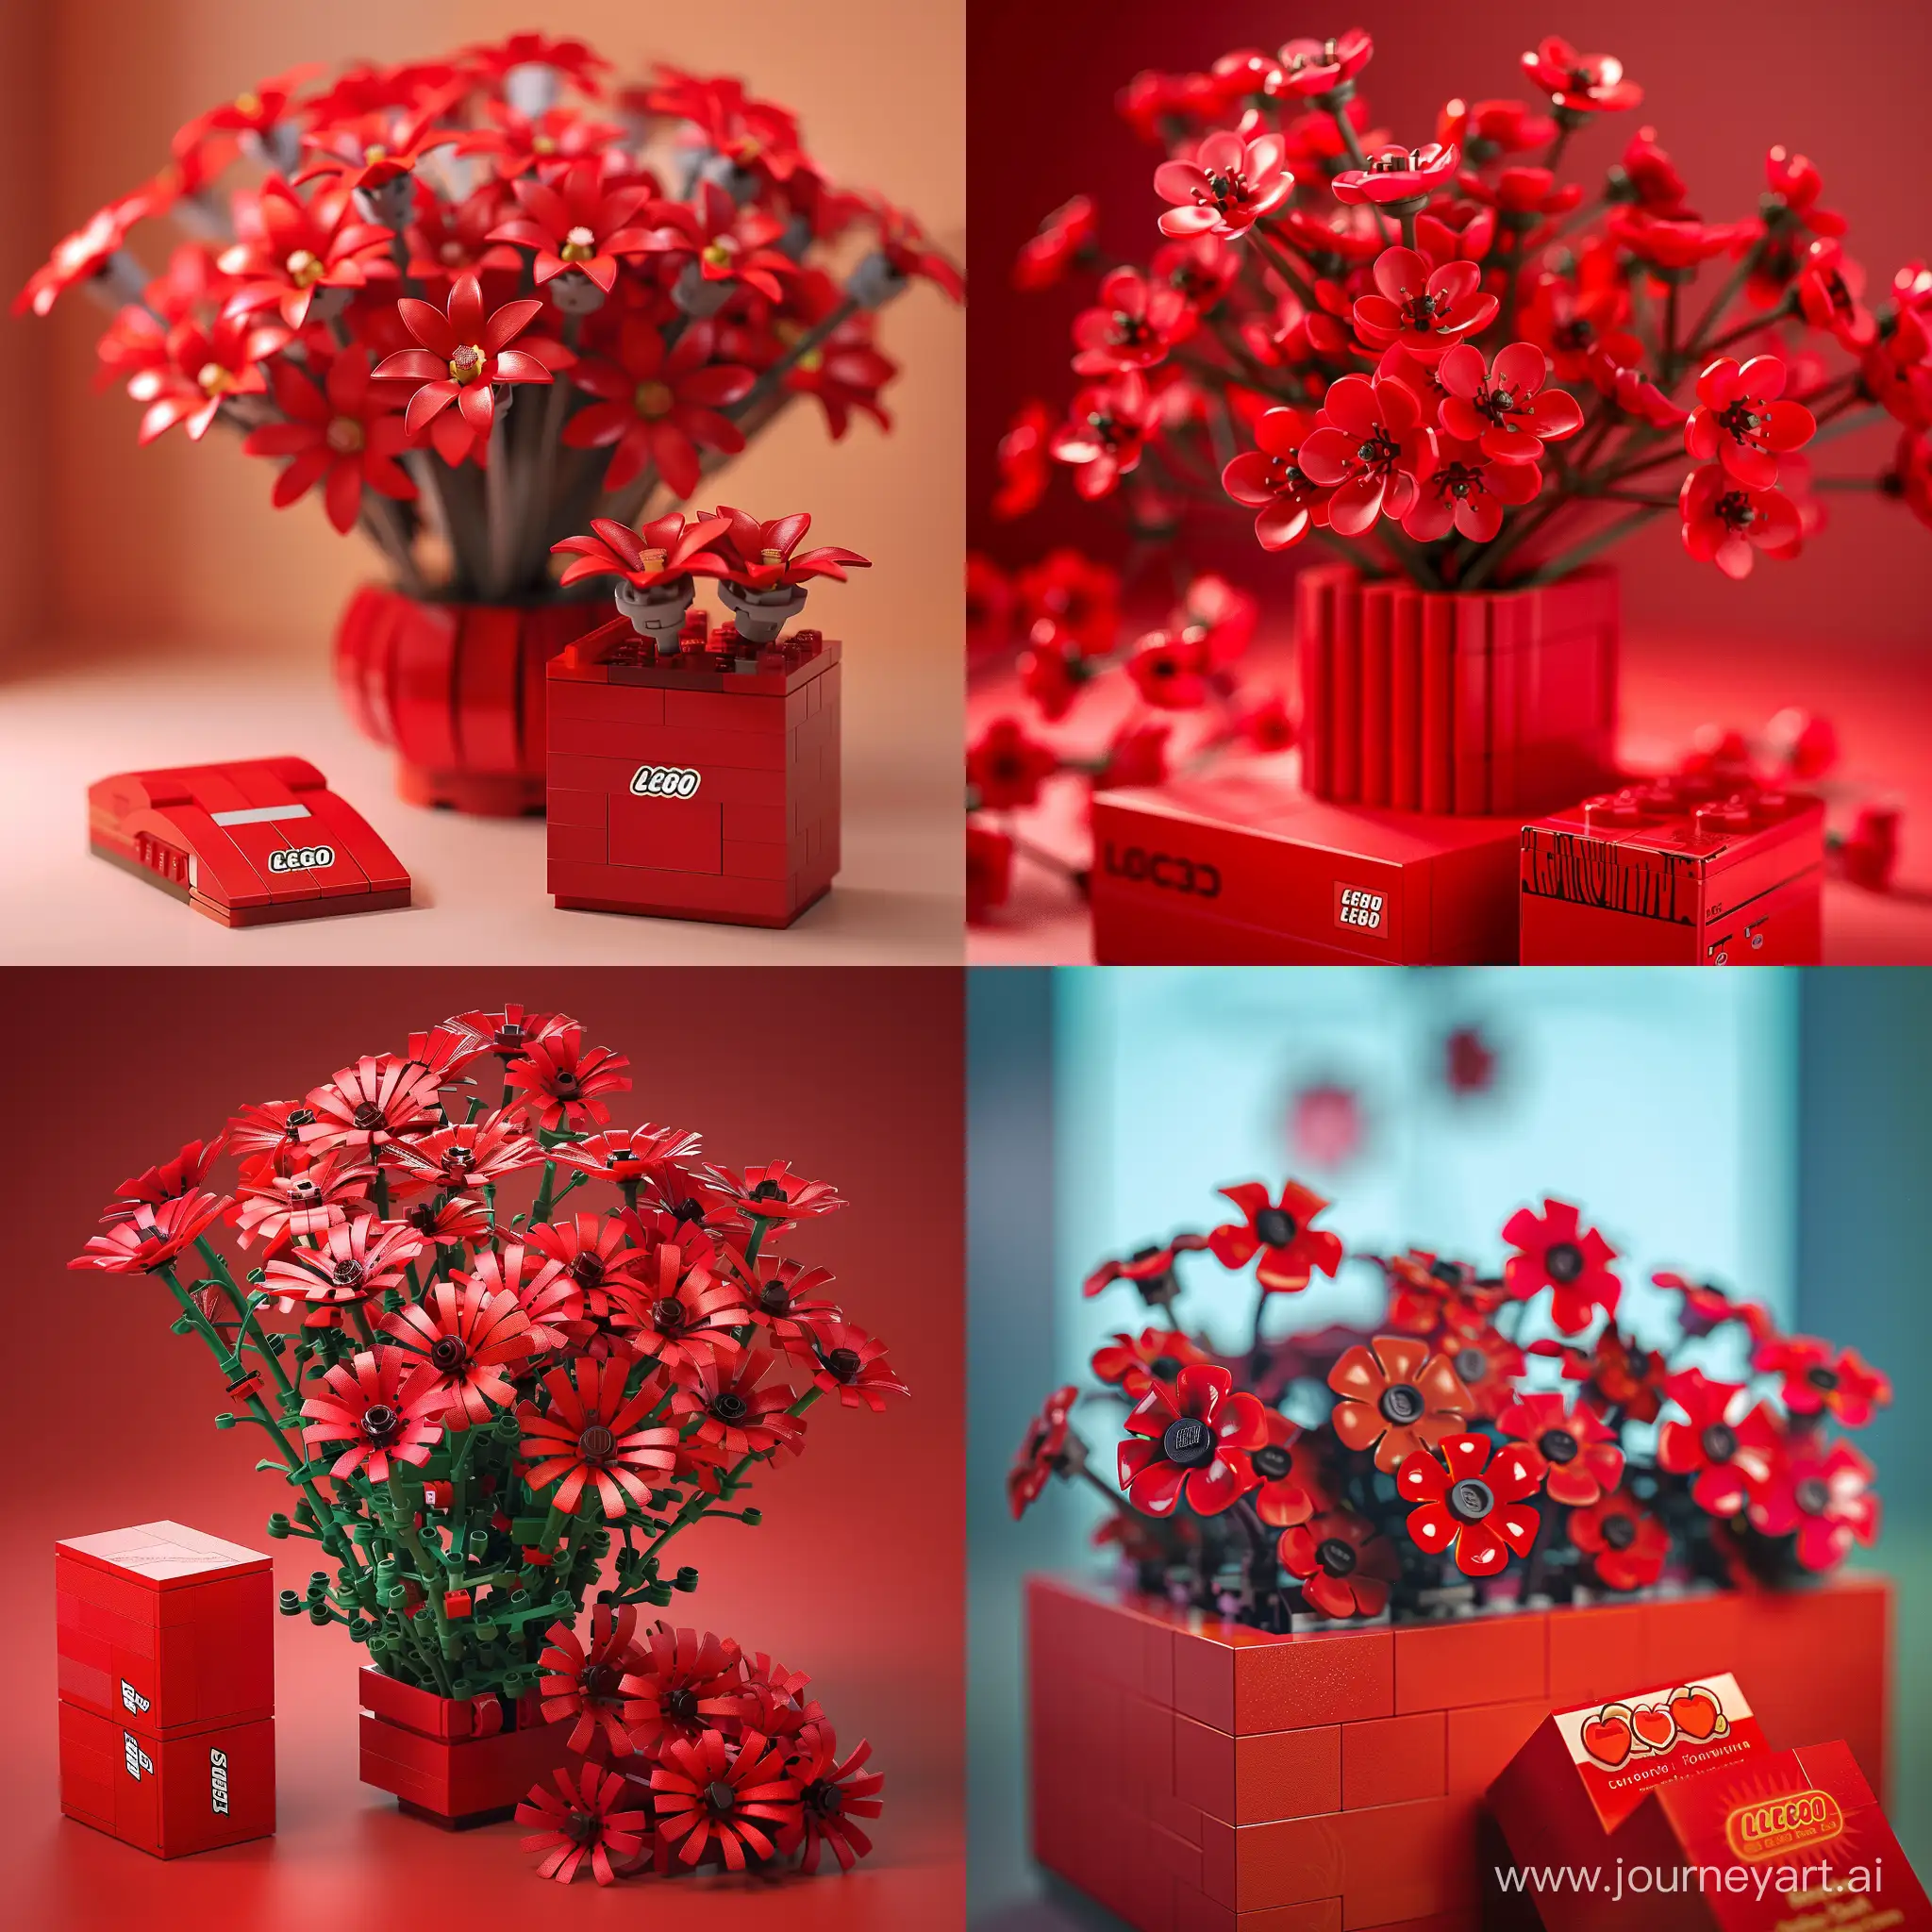 write 3d background, Very beautiful red lego flowers, a red lego box with the same flowers in the foreground, also add package of lego company of these red flowers 